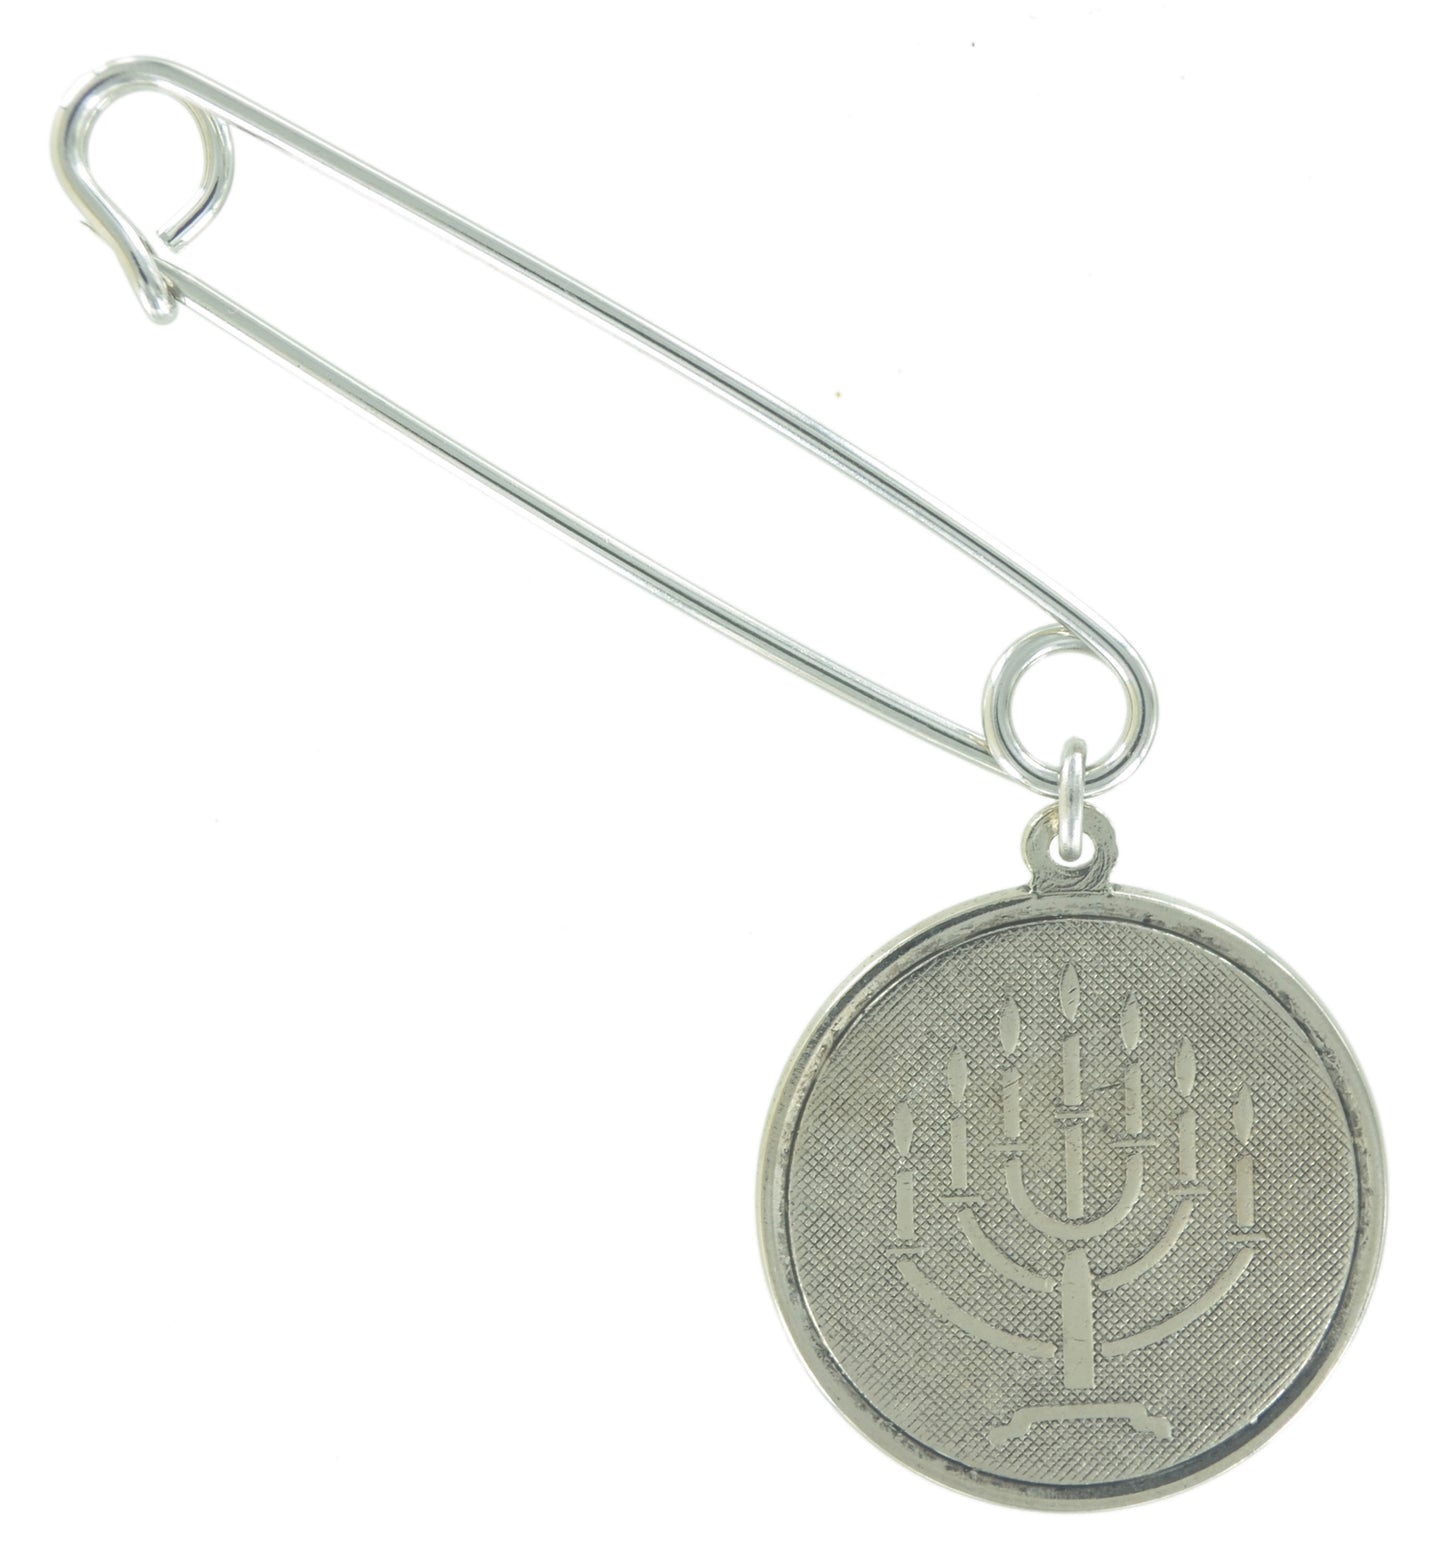 Ky & Co Made in USA Safety Pin Brooch End Menorah Symbol Charm Silver Tone  2"